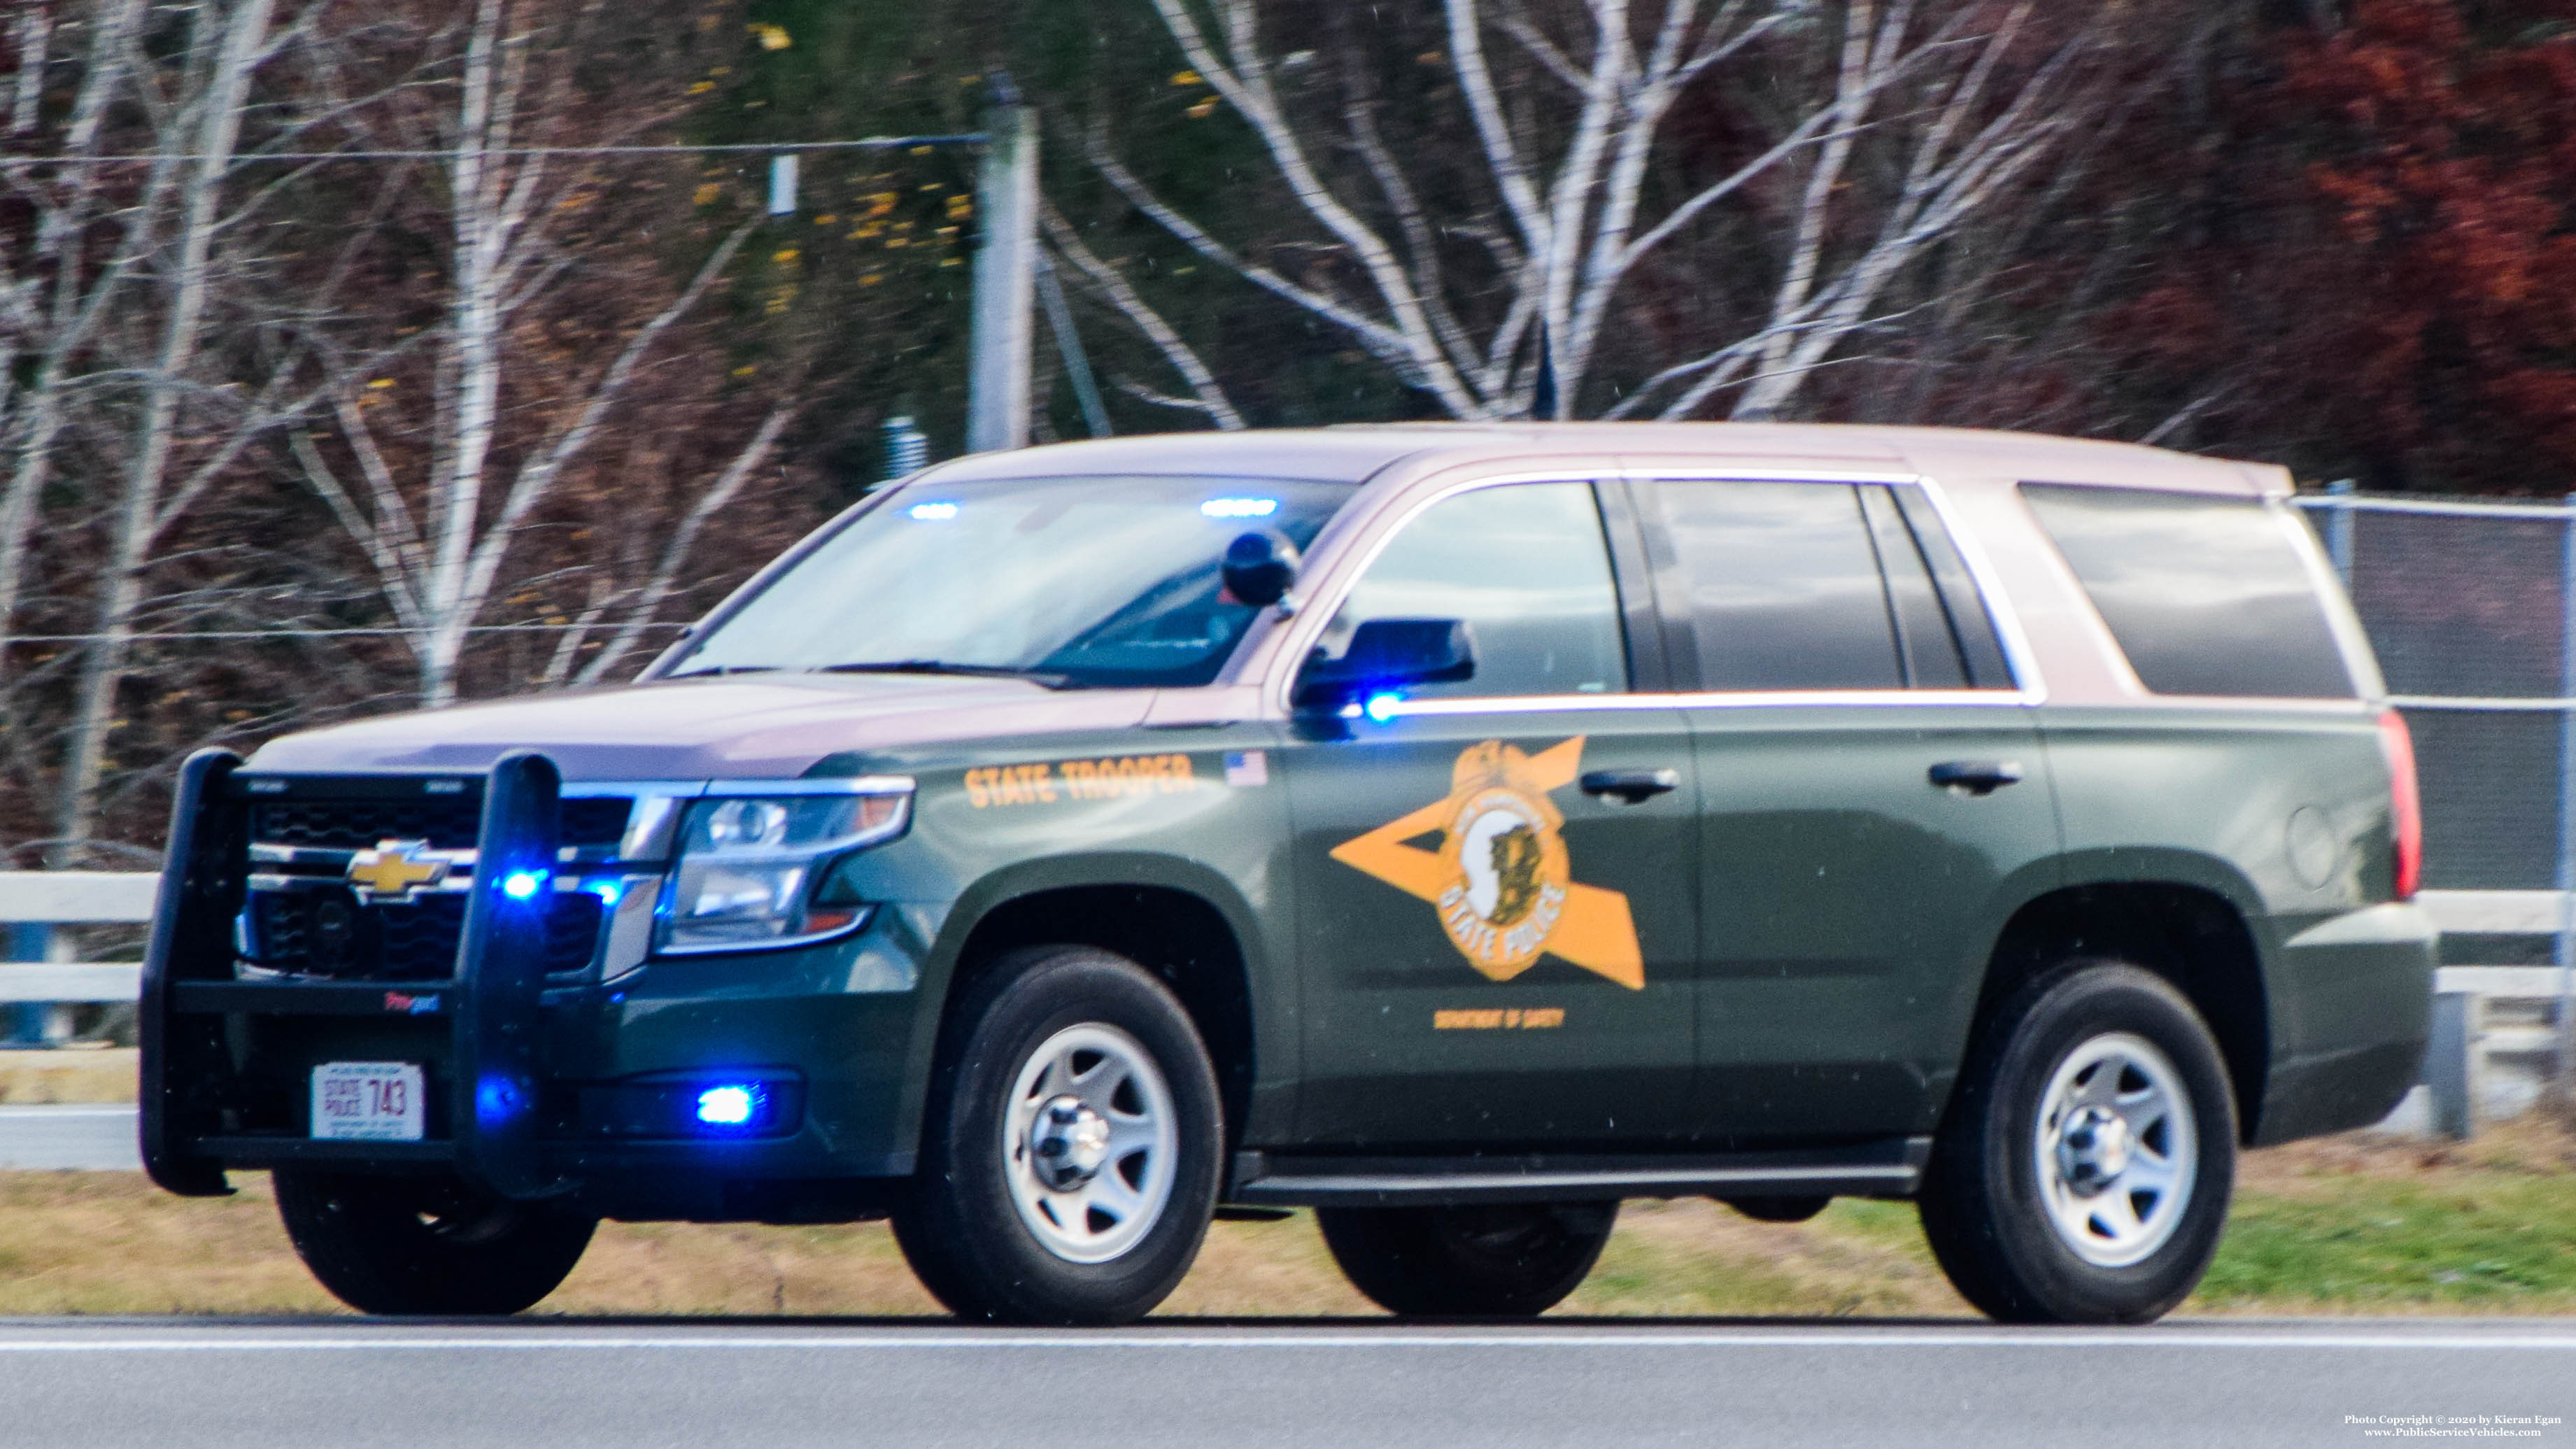 A photo  of New Hampshire State Police
            Cruiser 743, a 2014-2019 Chevrolet Tahoe             taken by Kieran Egan